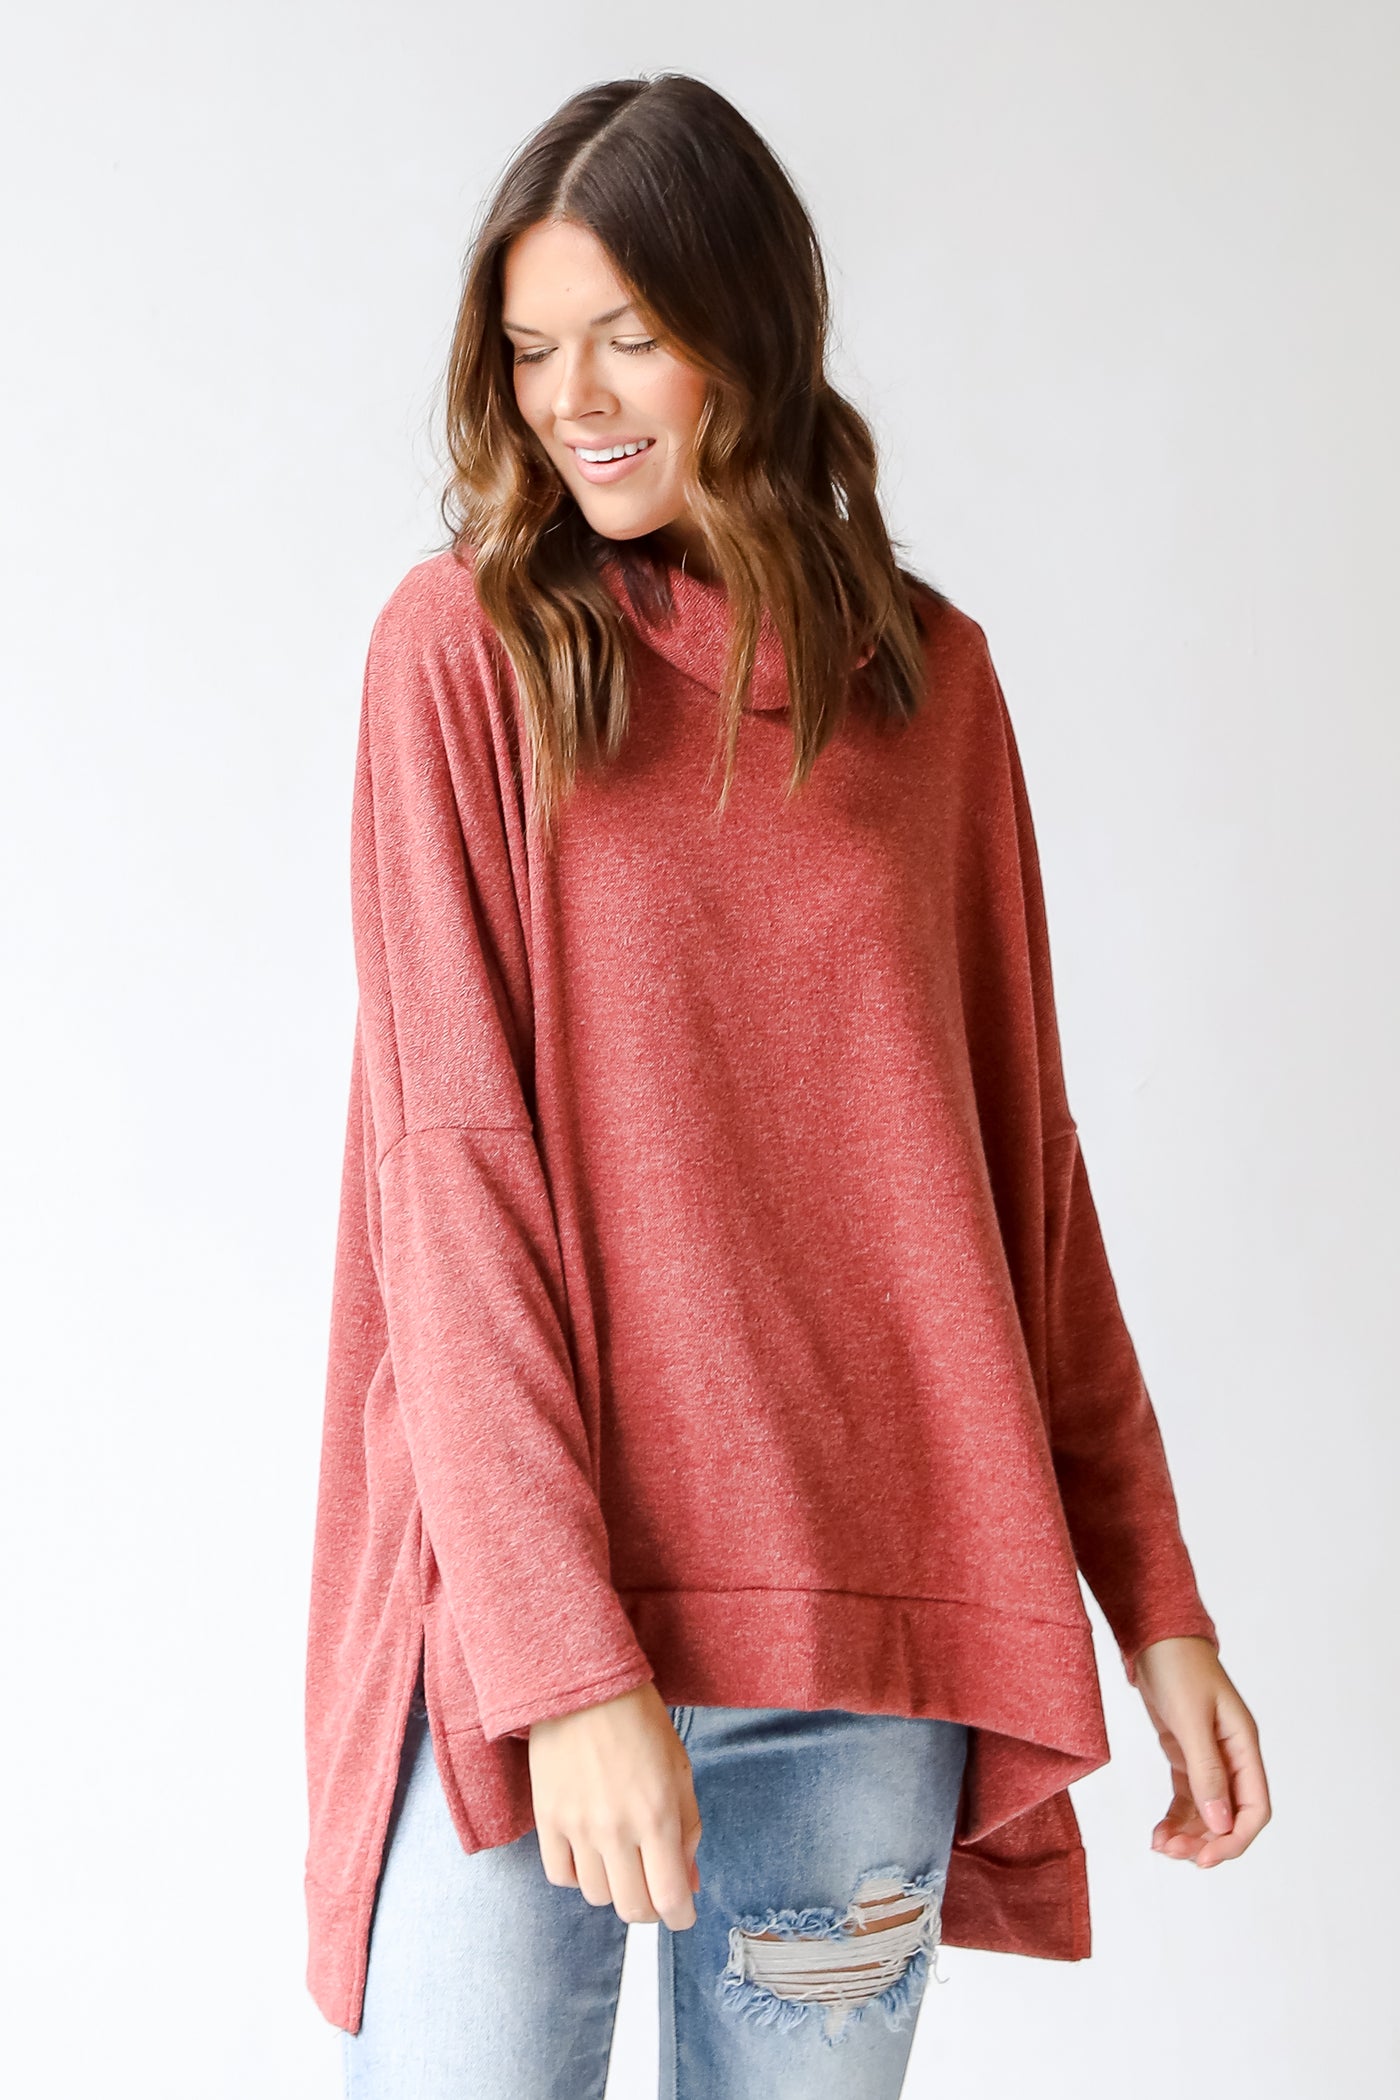 Cowl Neck Knit Top in rust front view